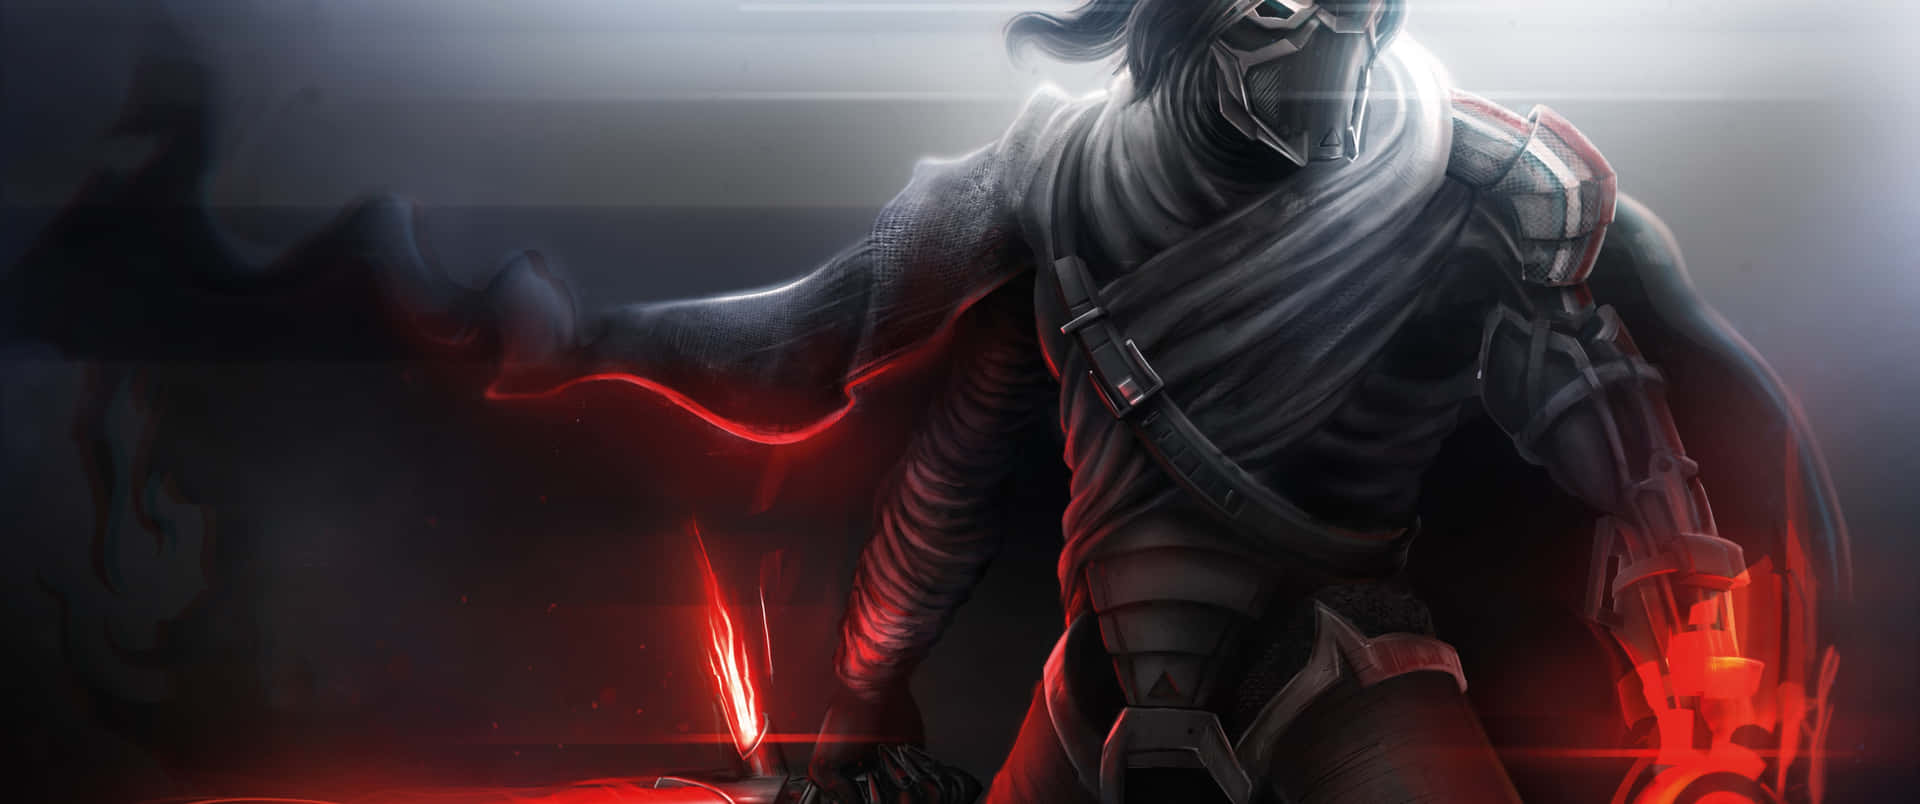 Kylo Ren in a Brooding 4K Ultrachrome Image Wallpaper